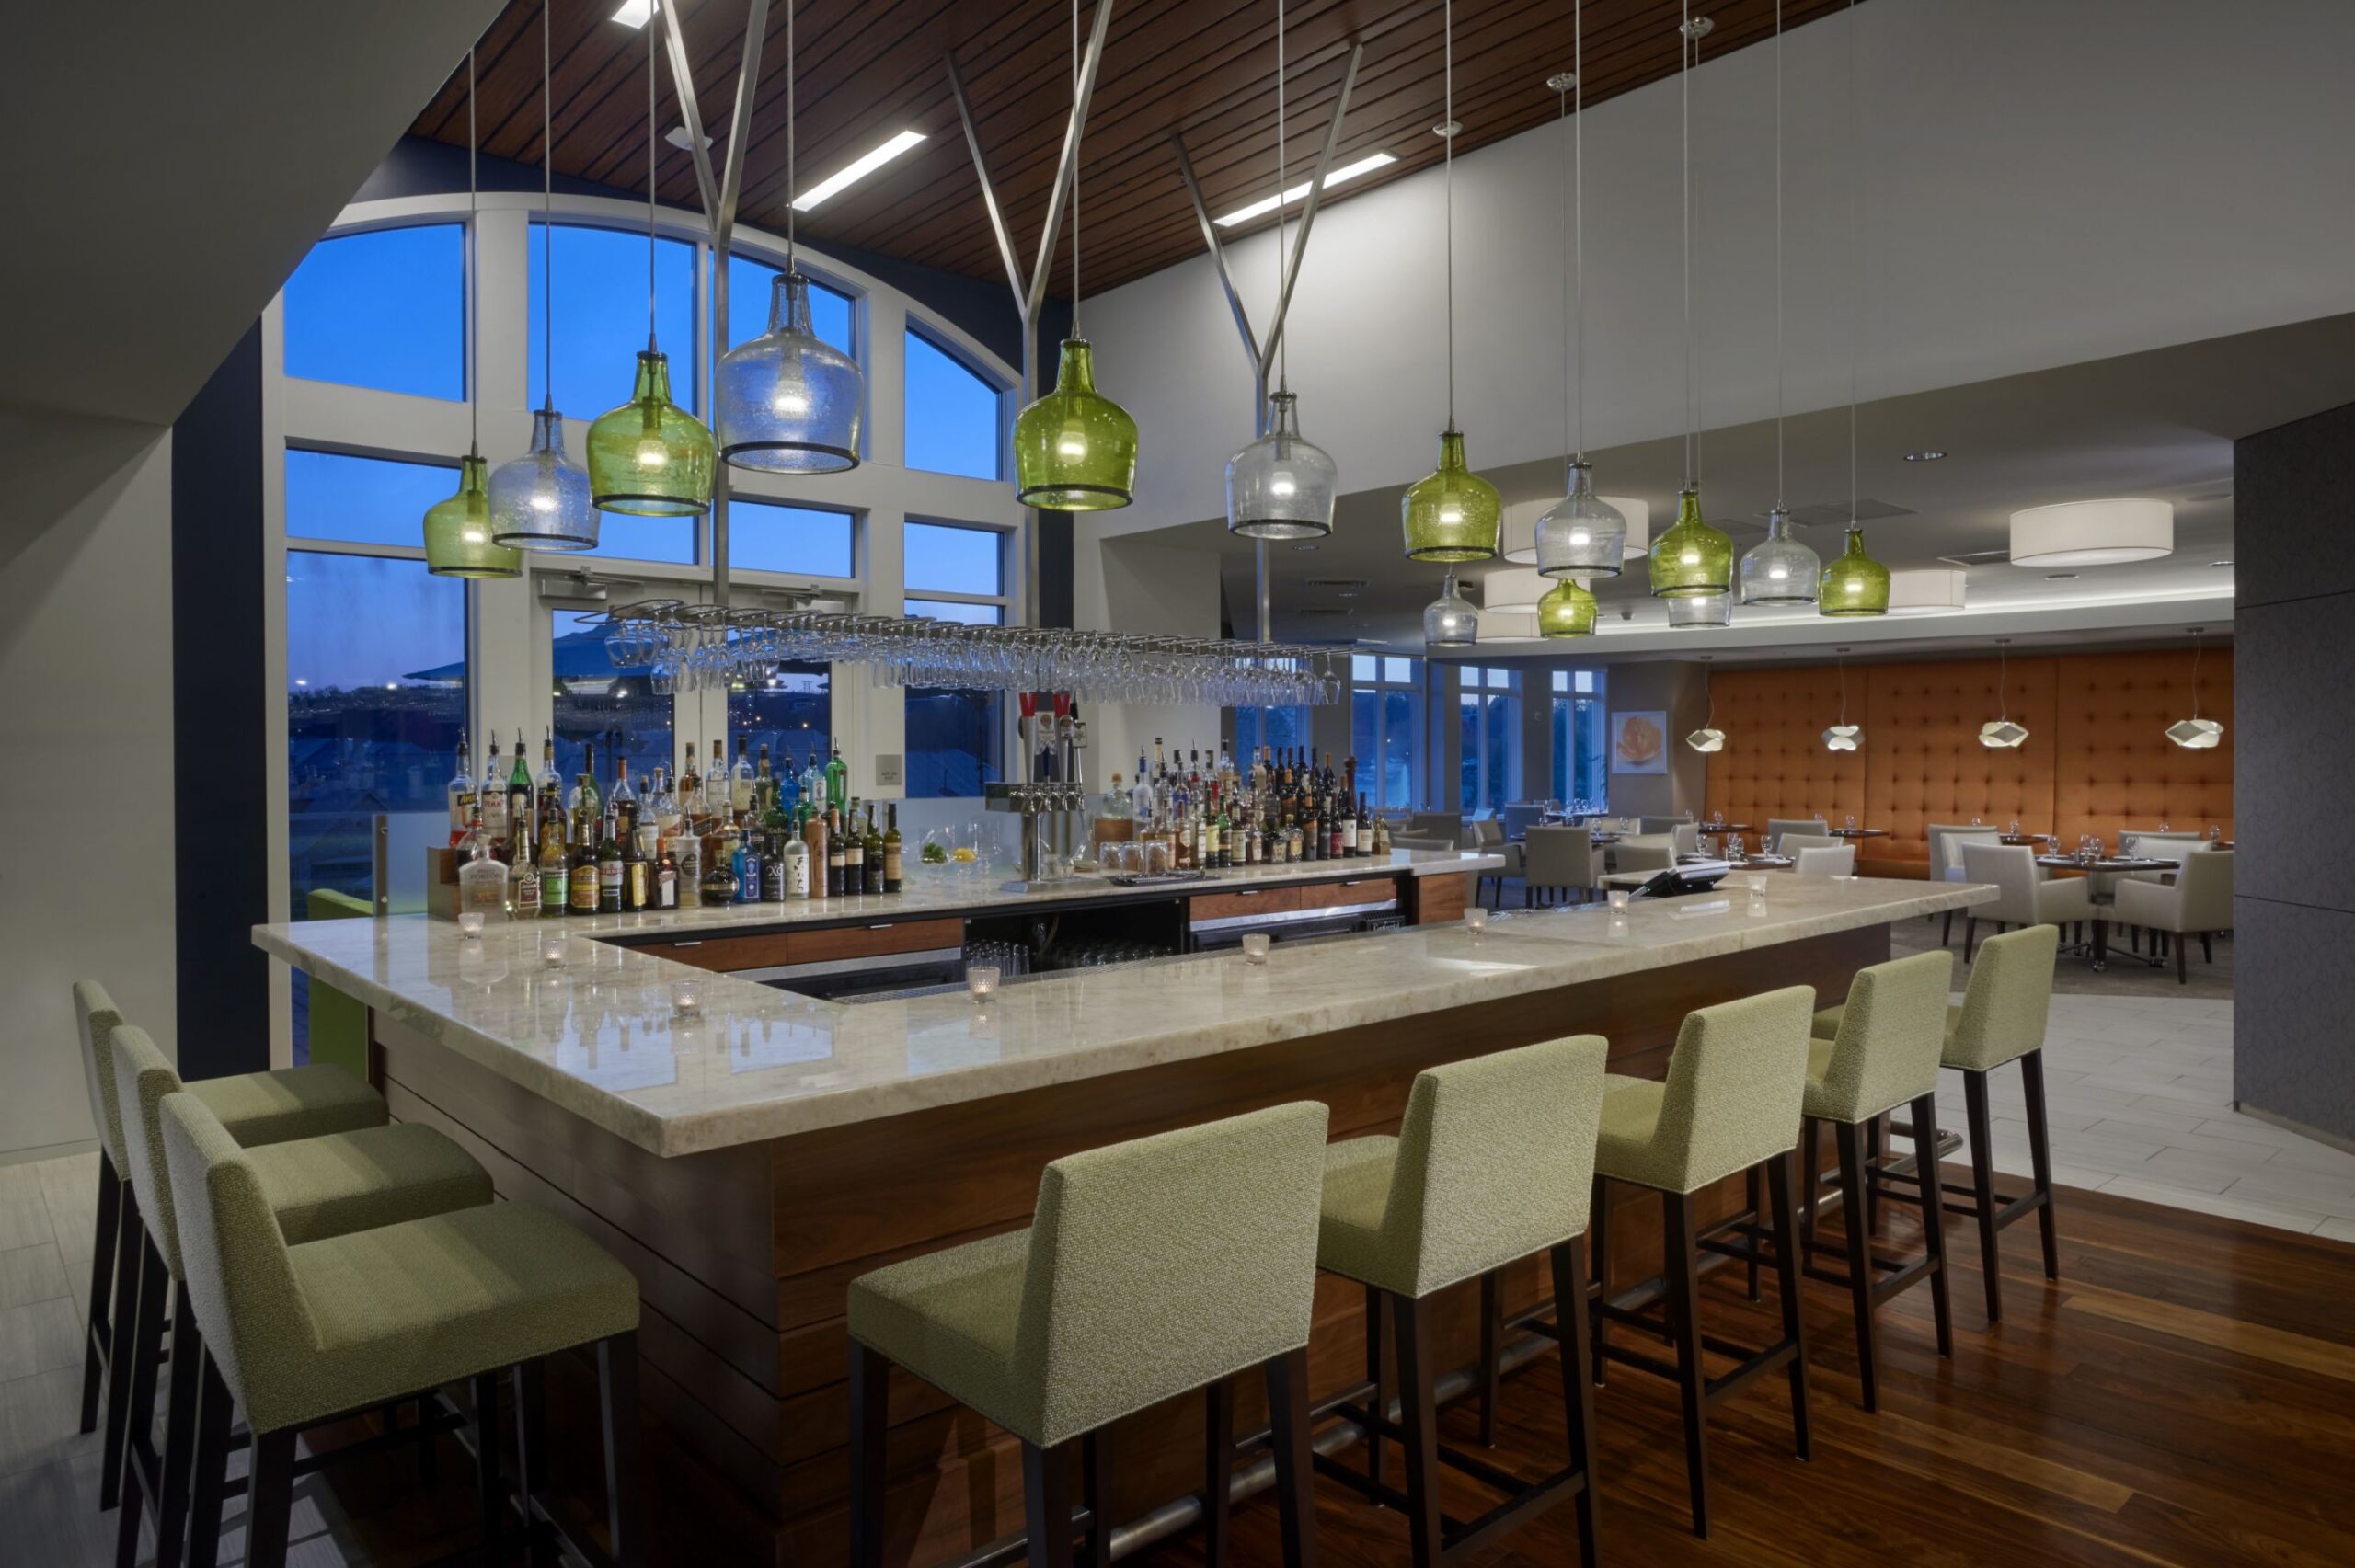 A retirement community with a bar featuring stools and wine bottles hanging from the ceiling.